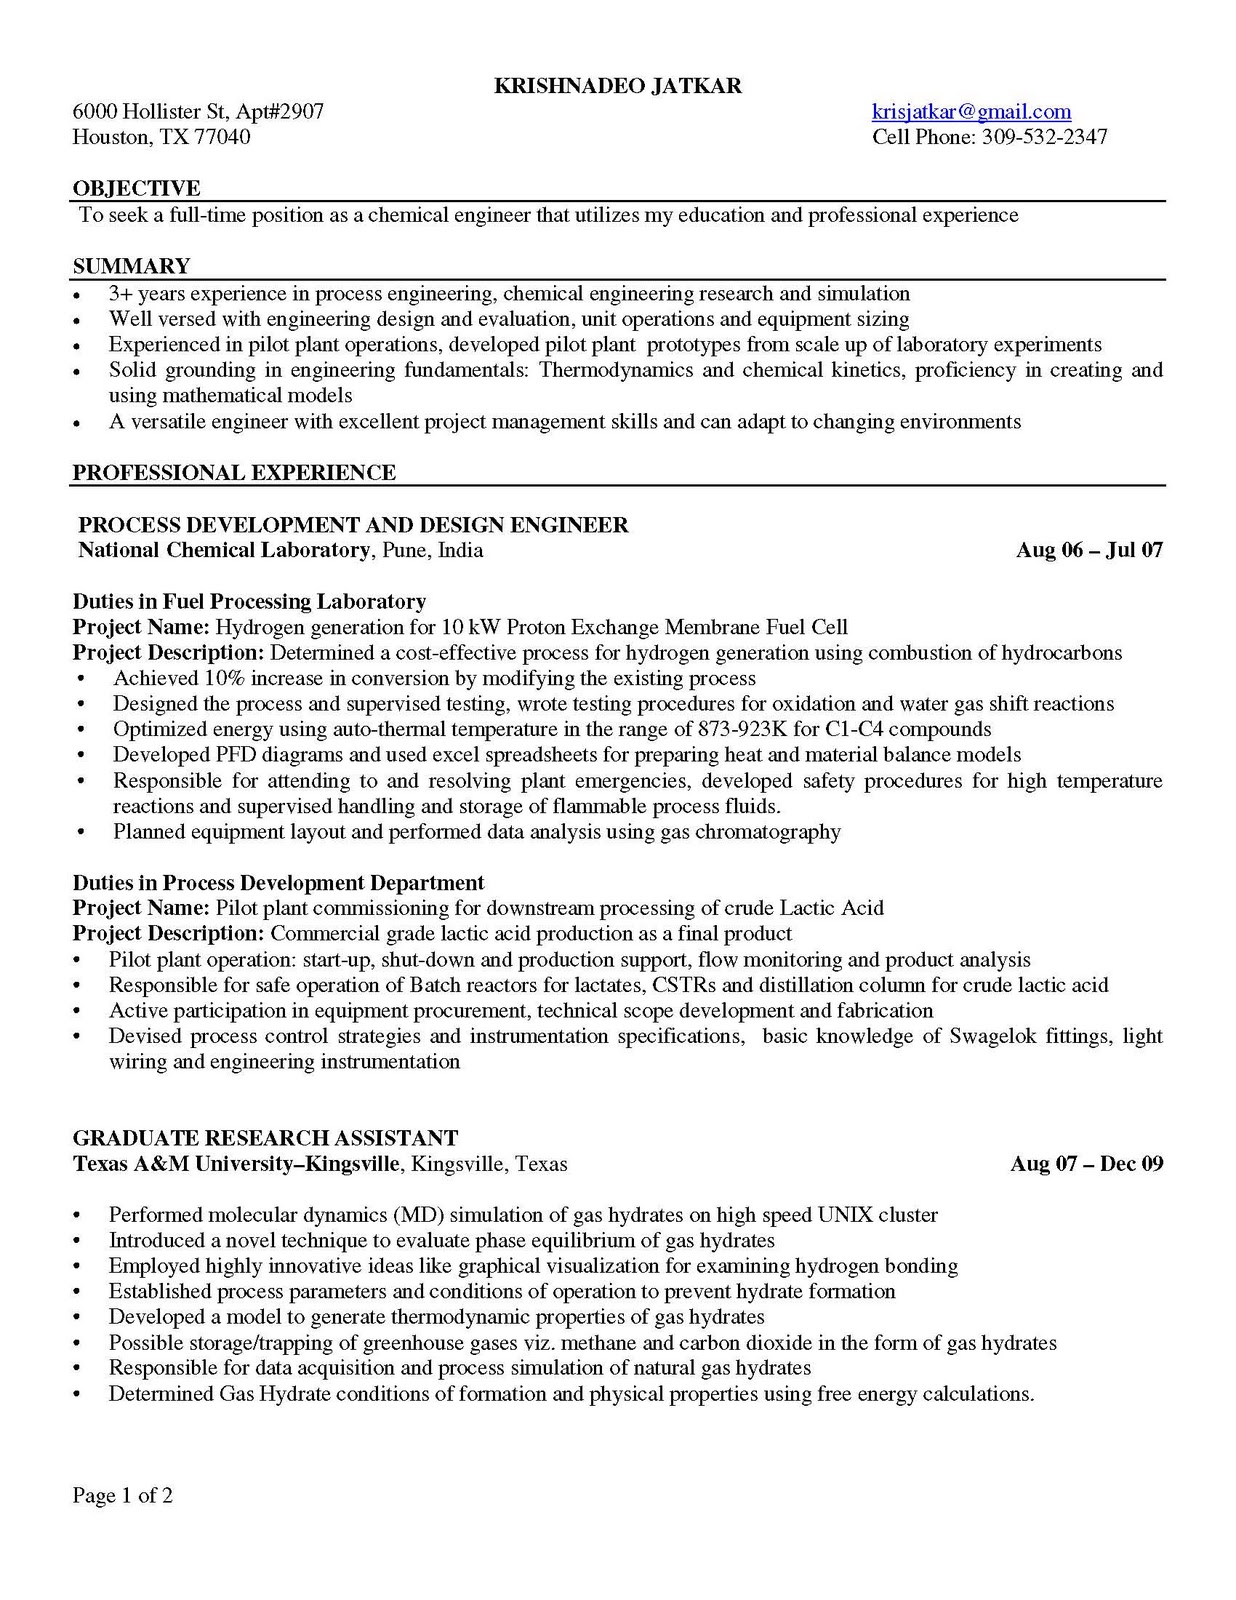 Example of resume for cadet pilot